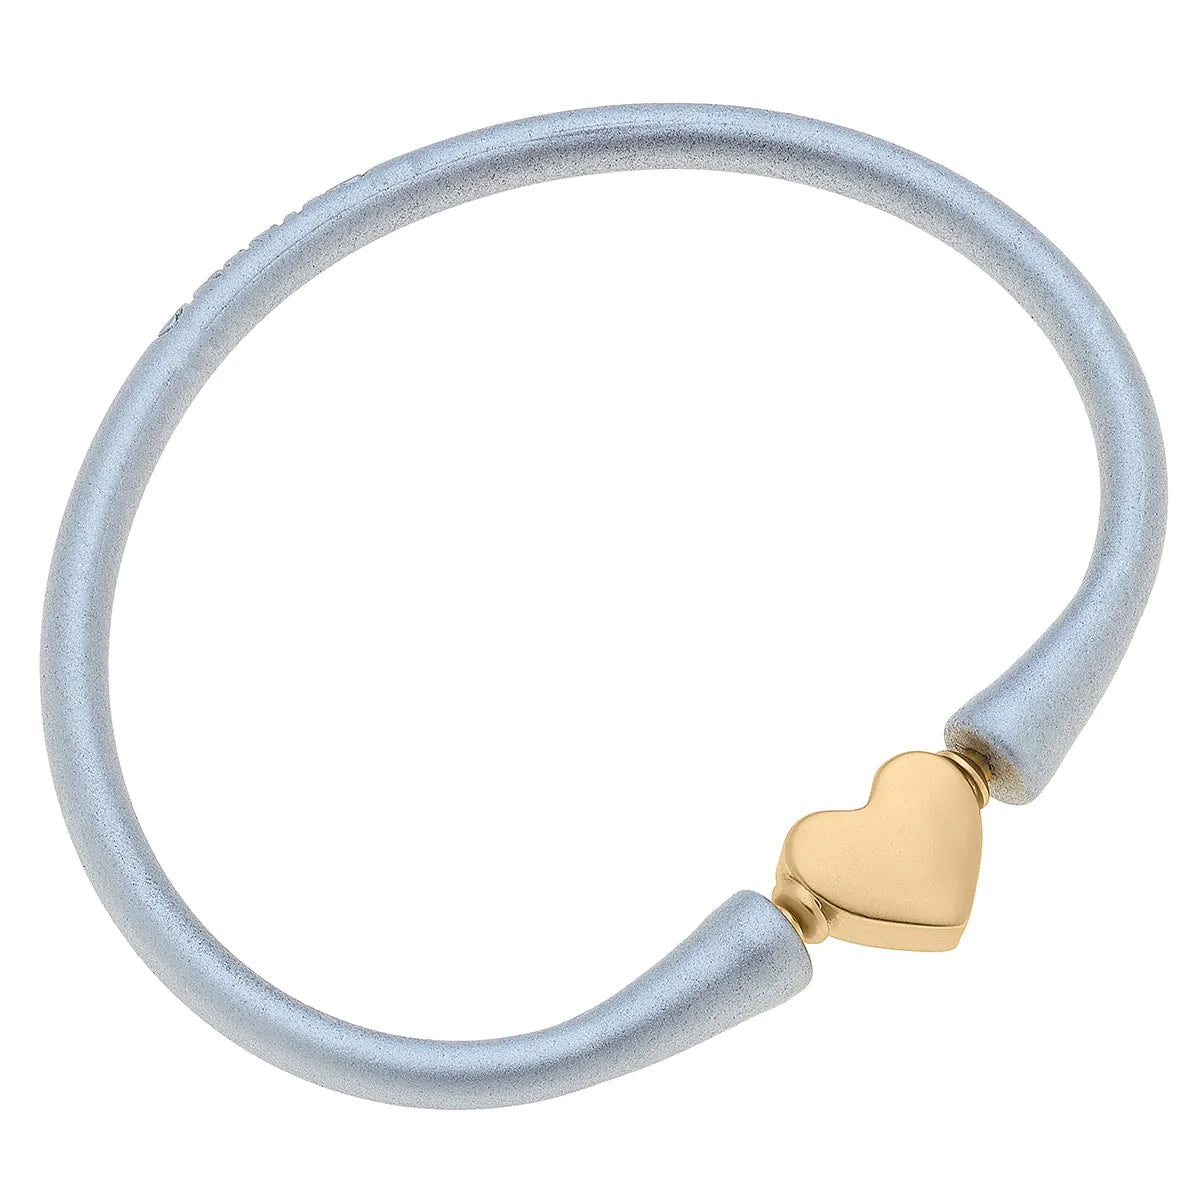 Blue or Silver Silicone Heart Bracelet